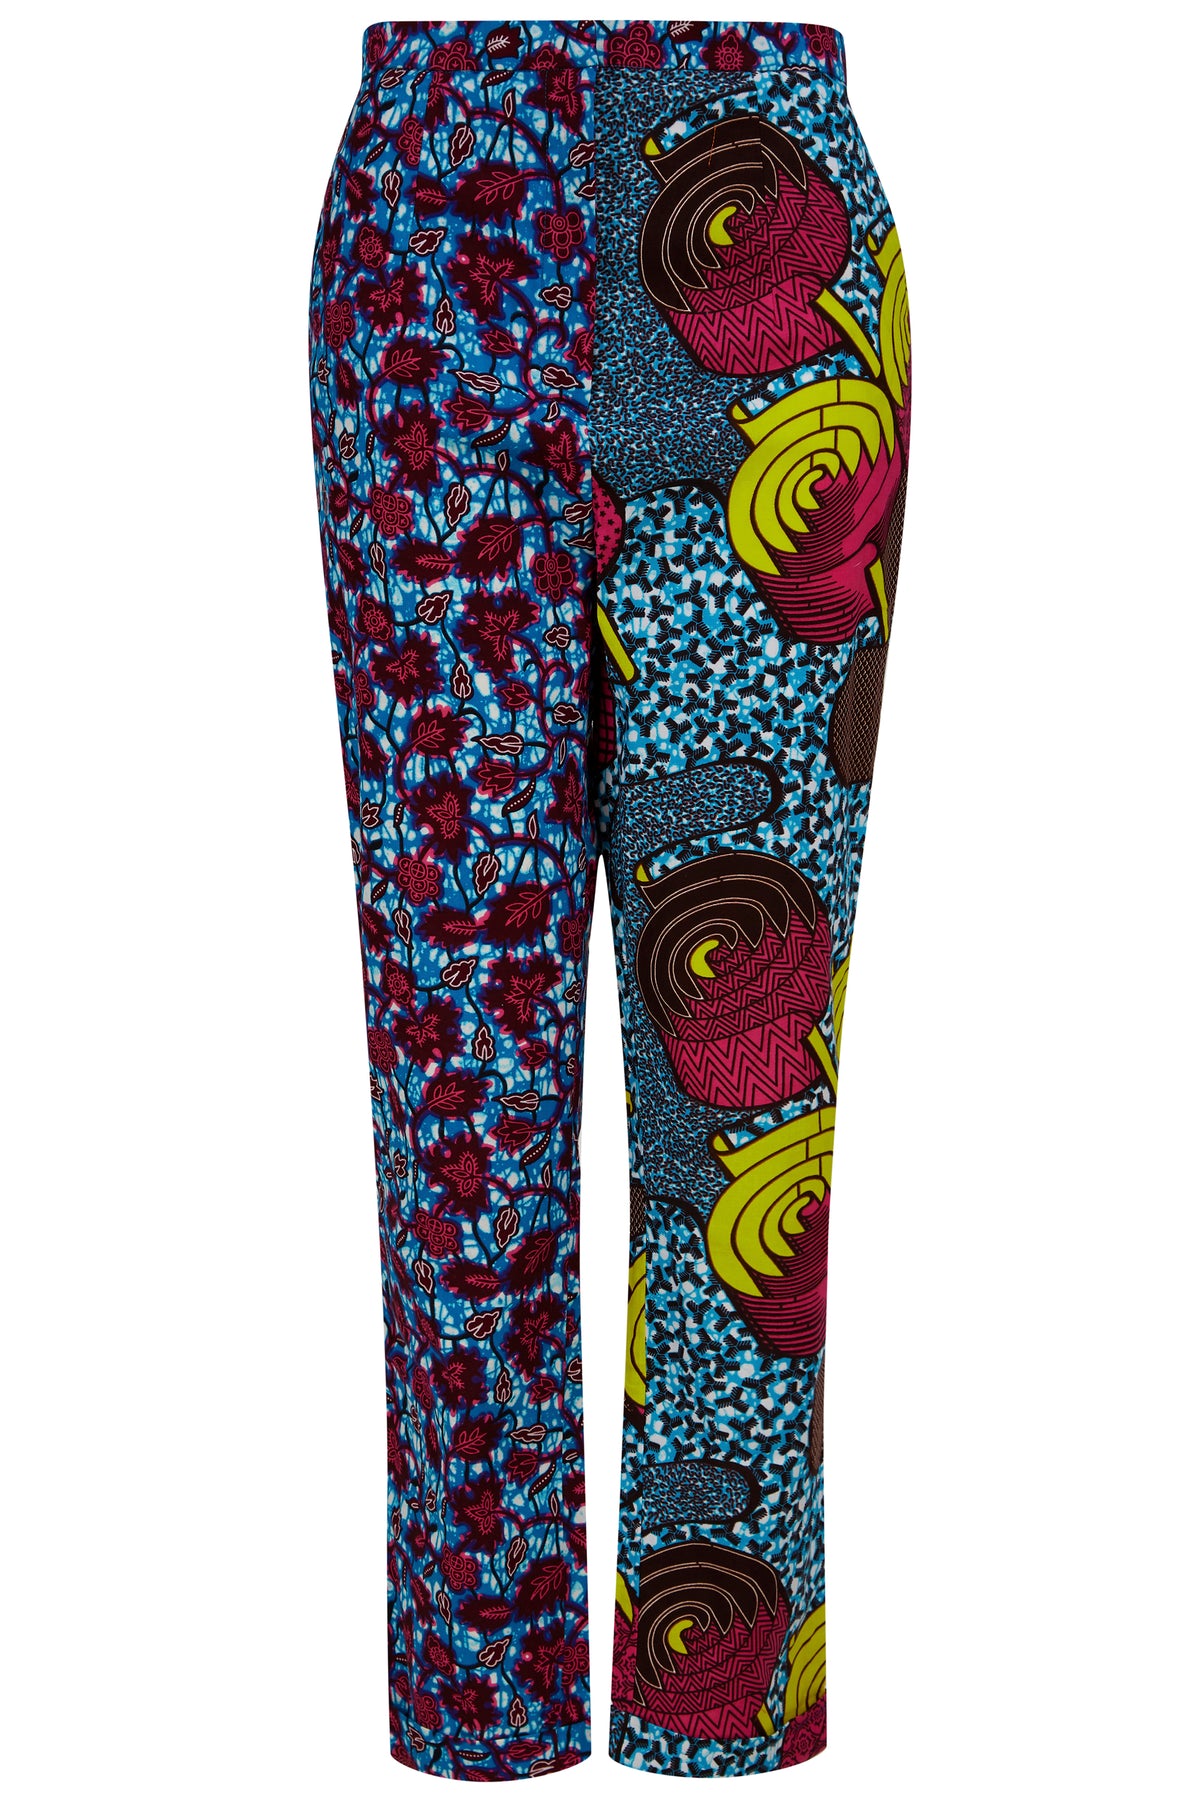 Dee Print Clash High Waisted Trousers - OHEMA OHENE AFRICAN INSPIRED FASHION